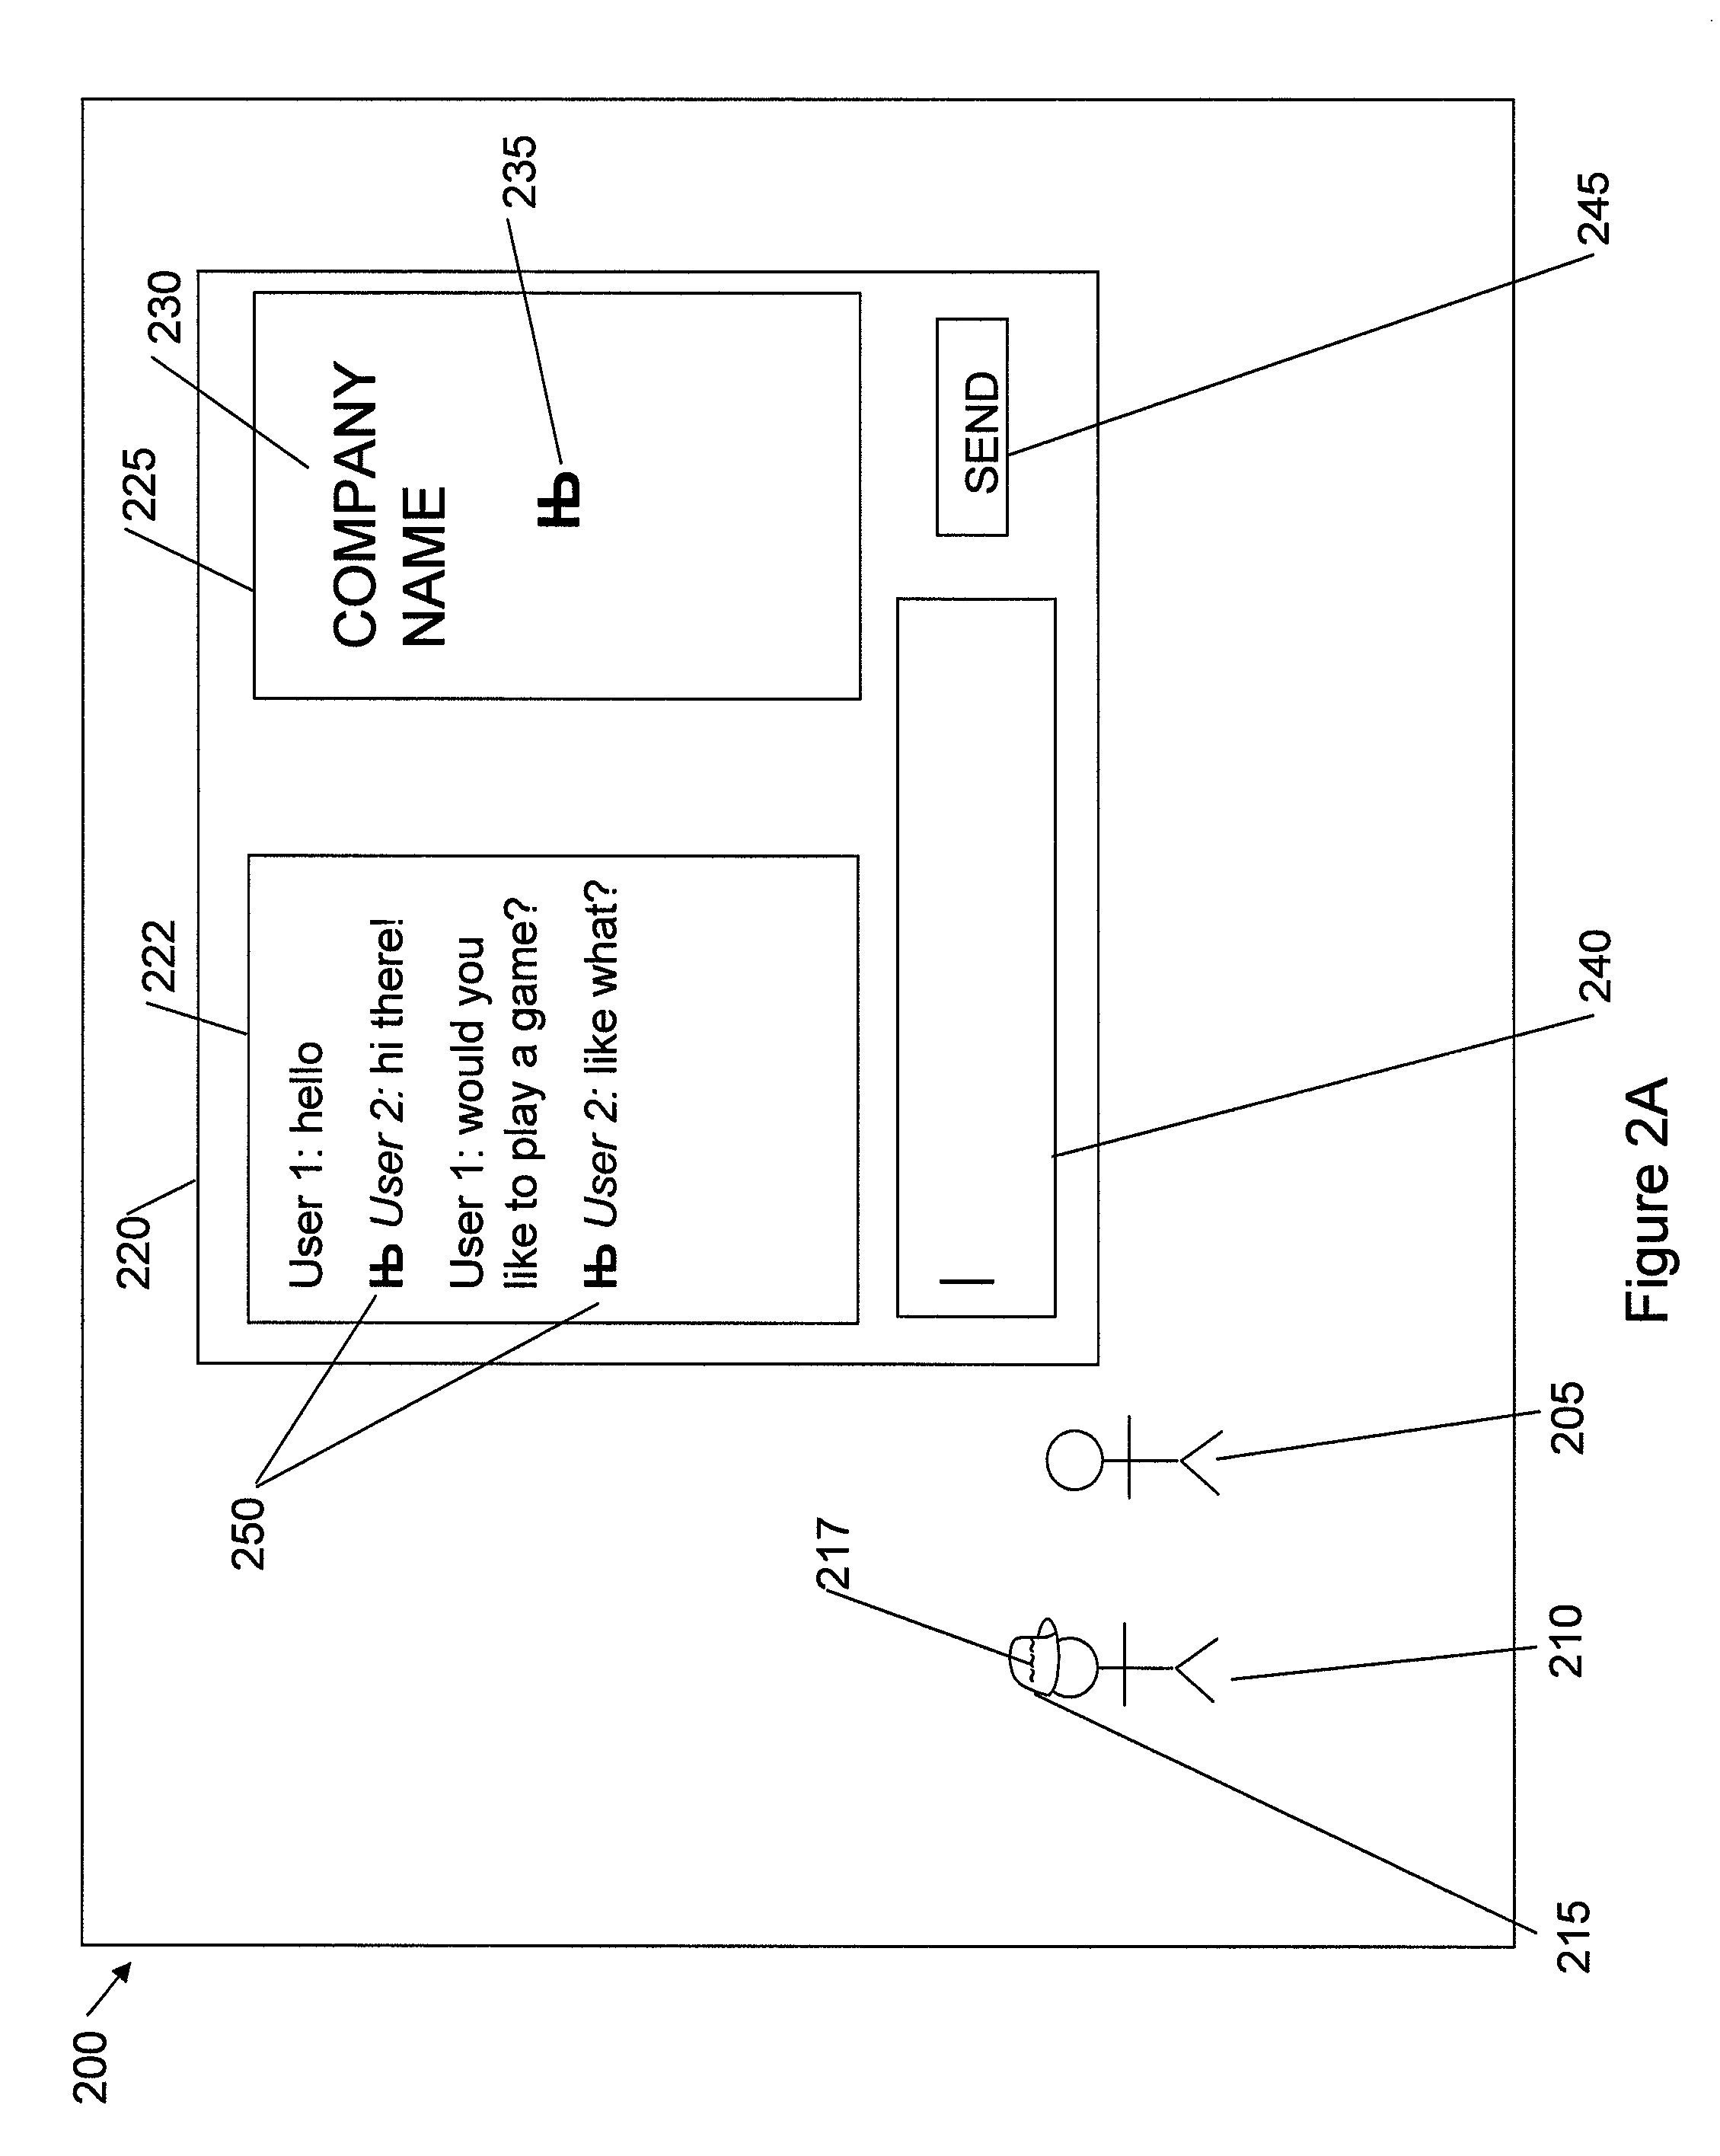 System and method for item inquiry and information presentation via standard communication paths